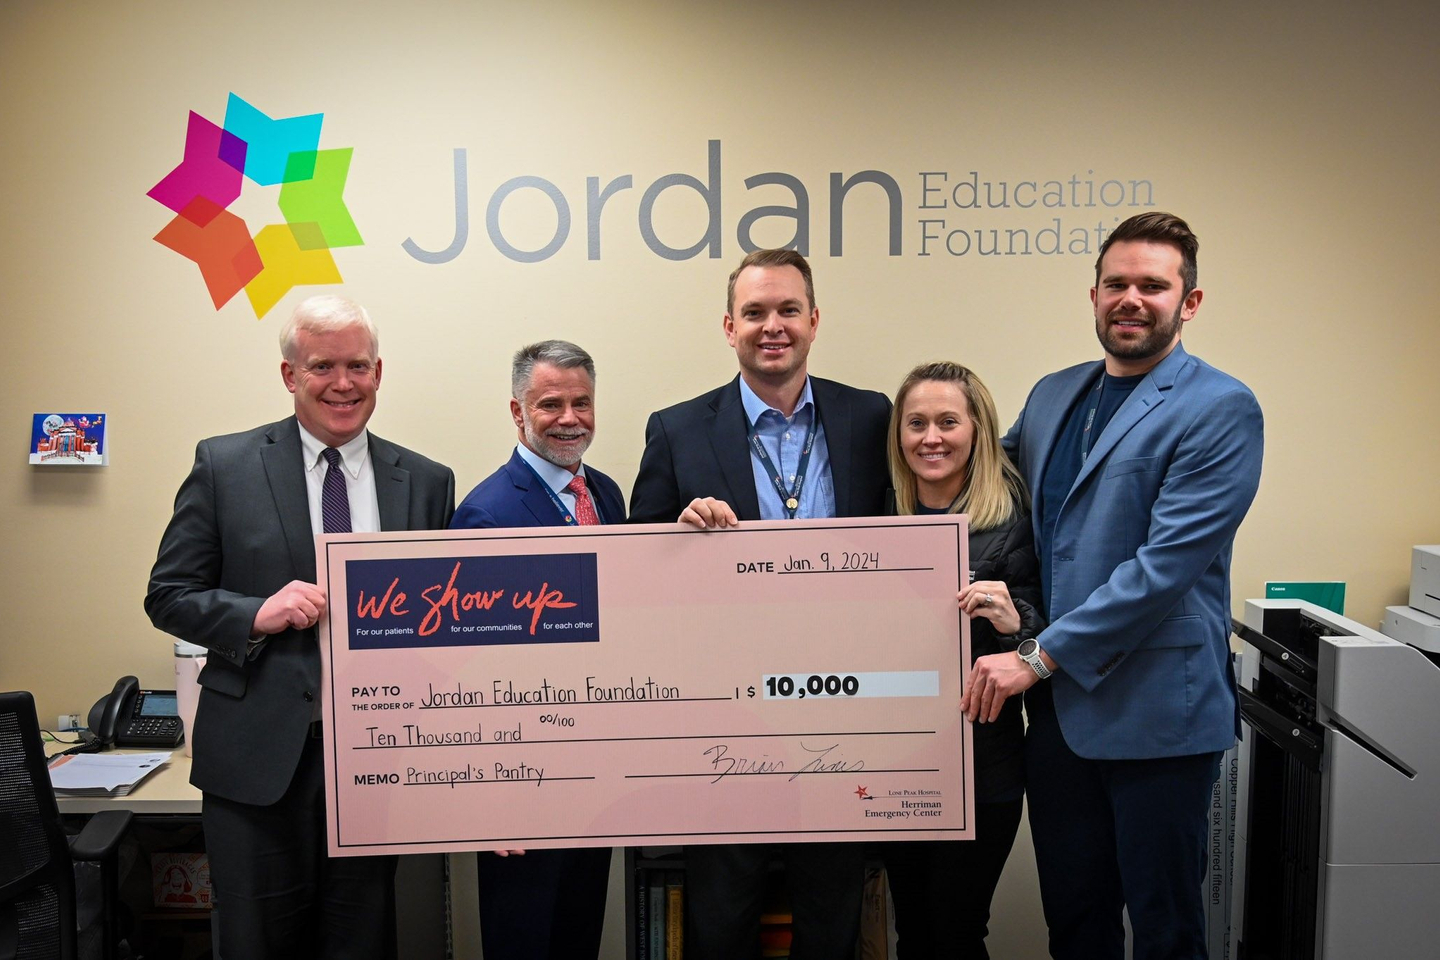 Five individuals from the Jordan Education Foundation and Lone Peak Hospital smiling while holding a giant ceremonial check